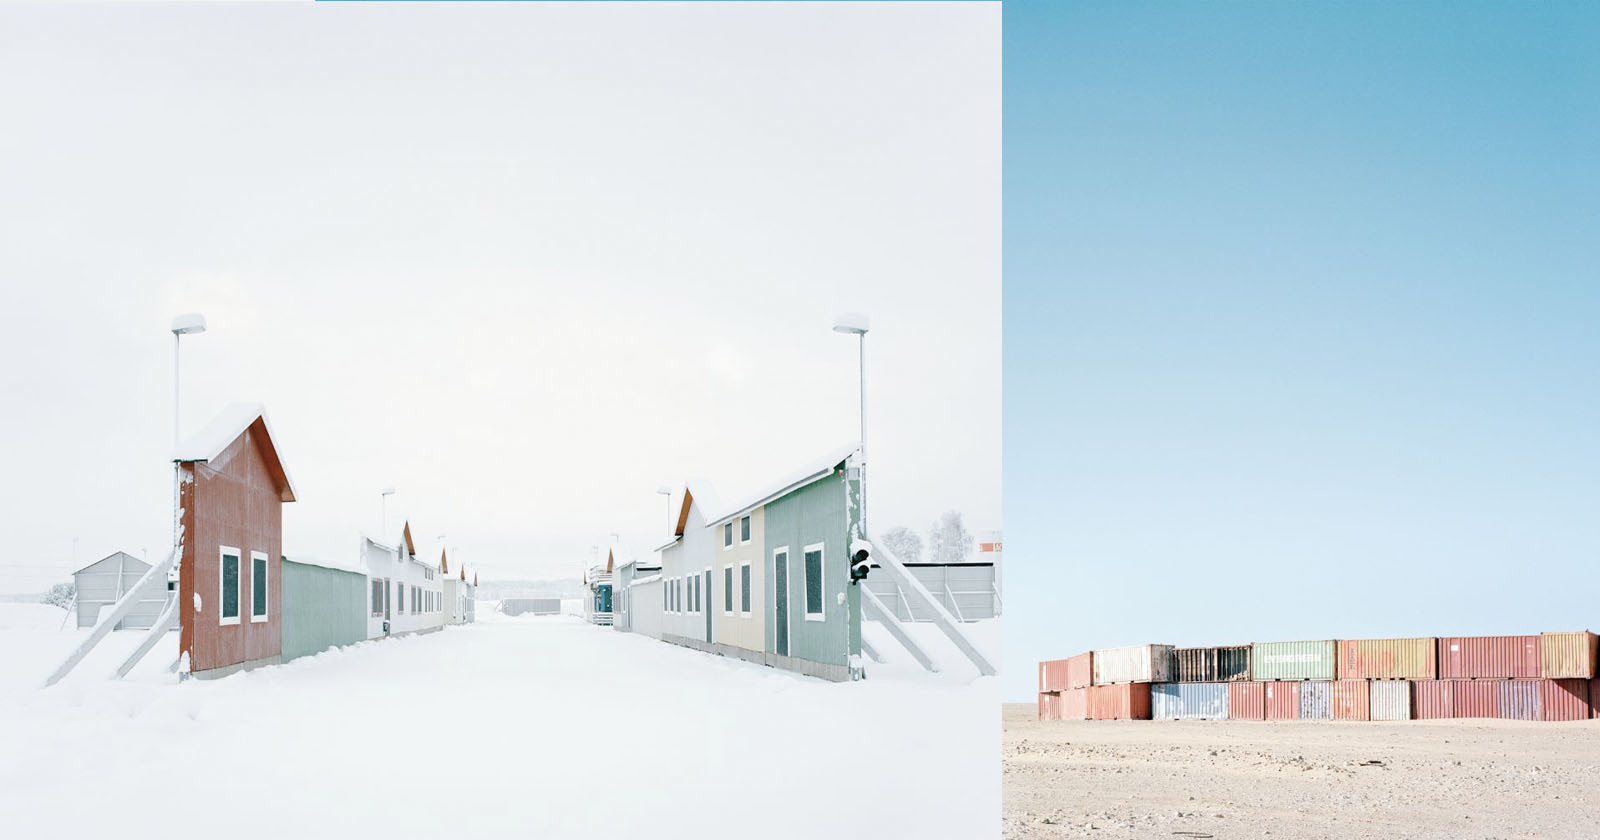 Eerie Photos of Remote, Restricted Locations Captured on Large Format Film